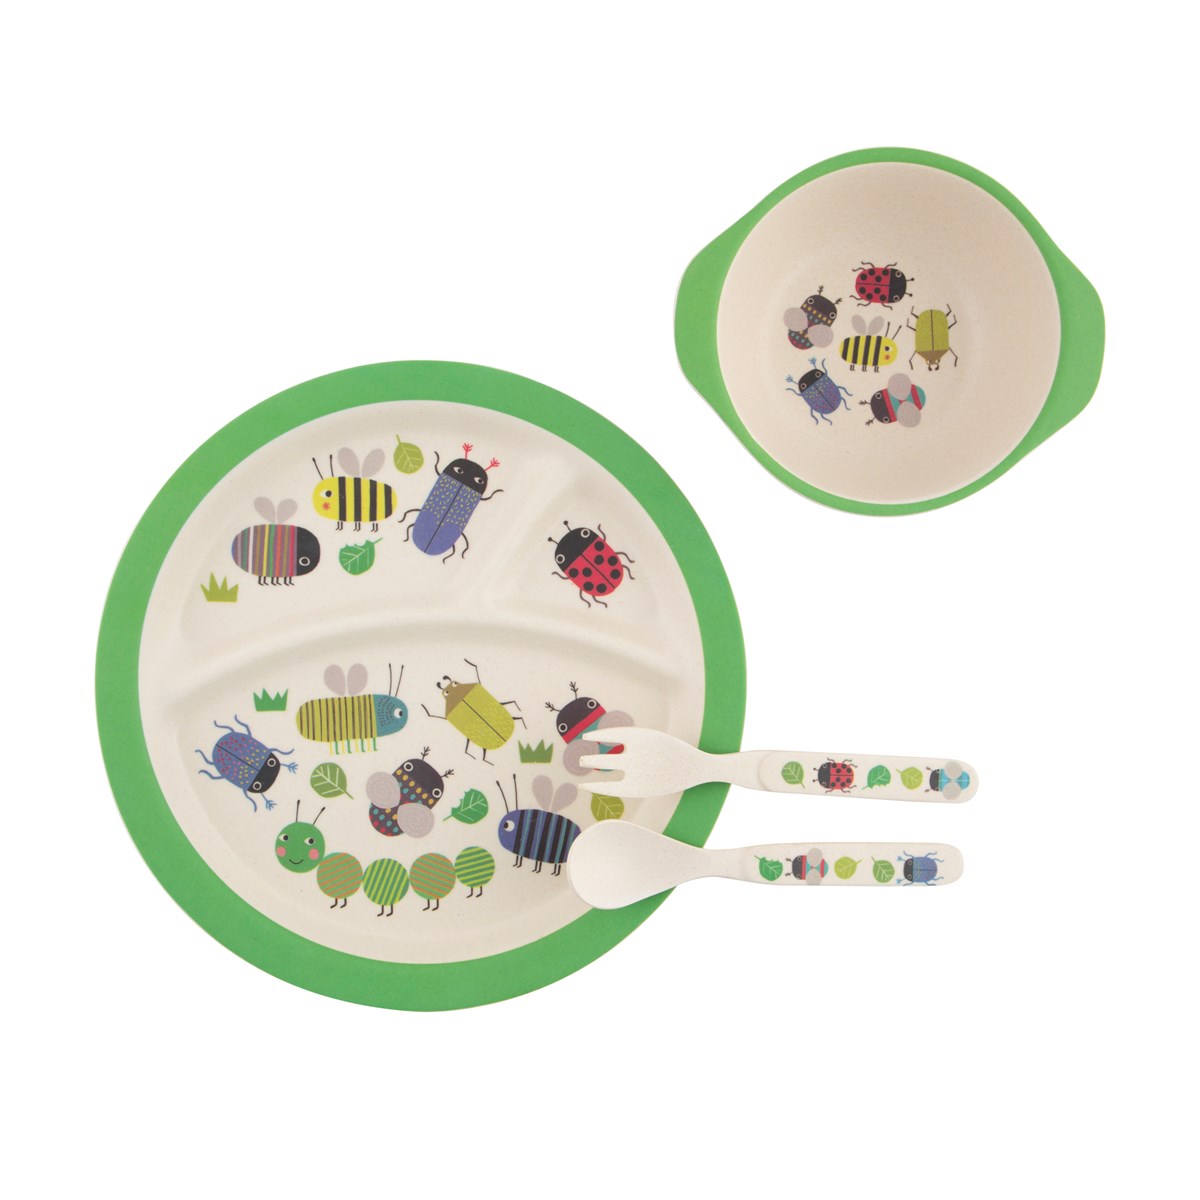 Explore nature with this gorgeous bamboo plate featuring a fun 'busy bugs' design.